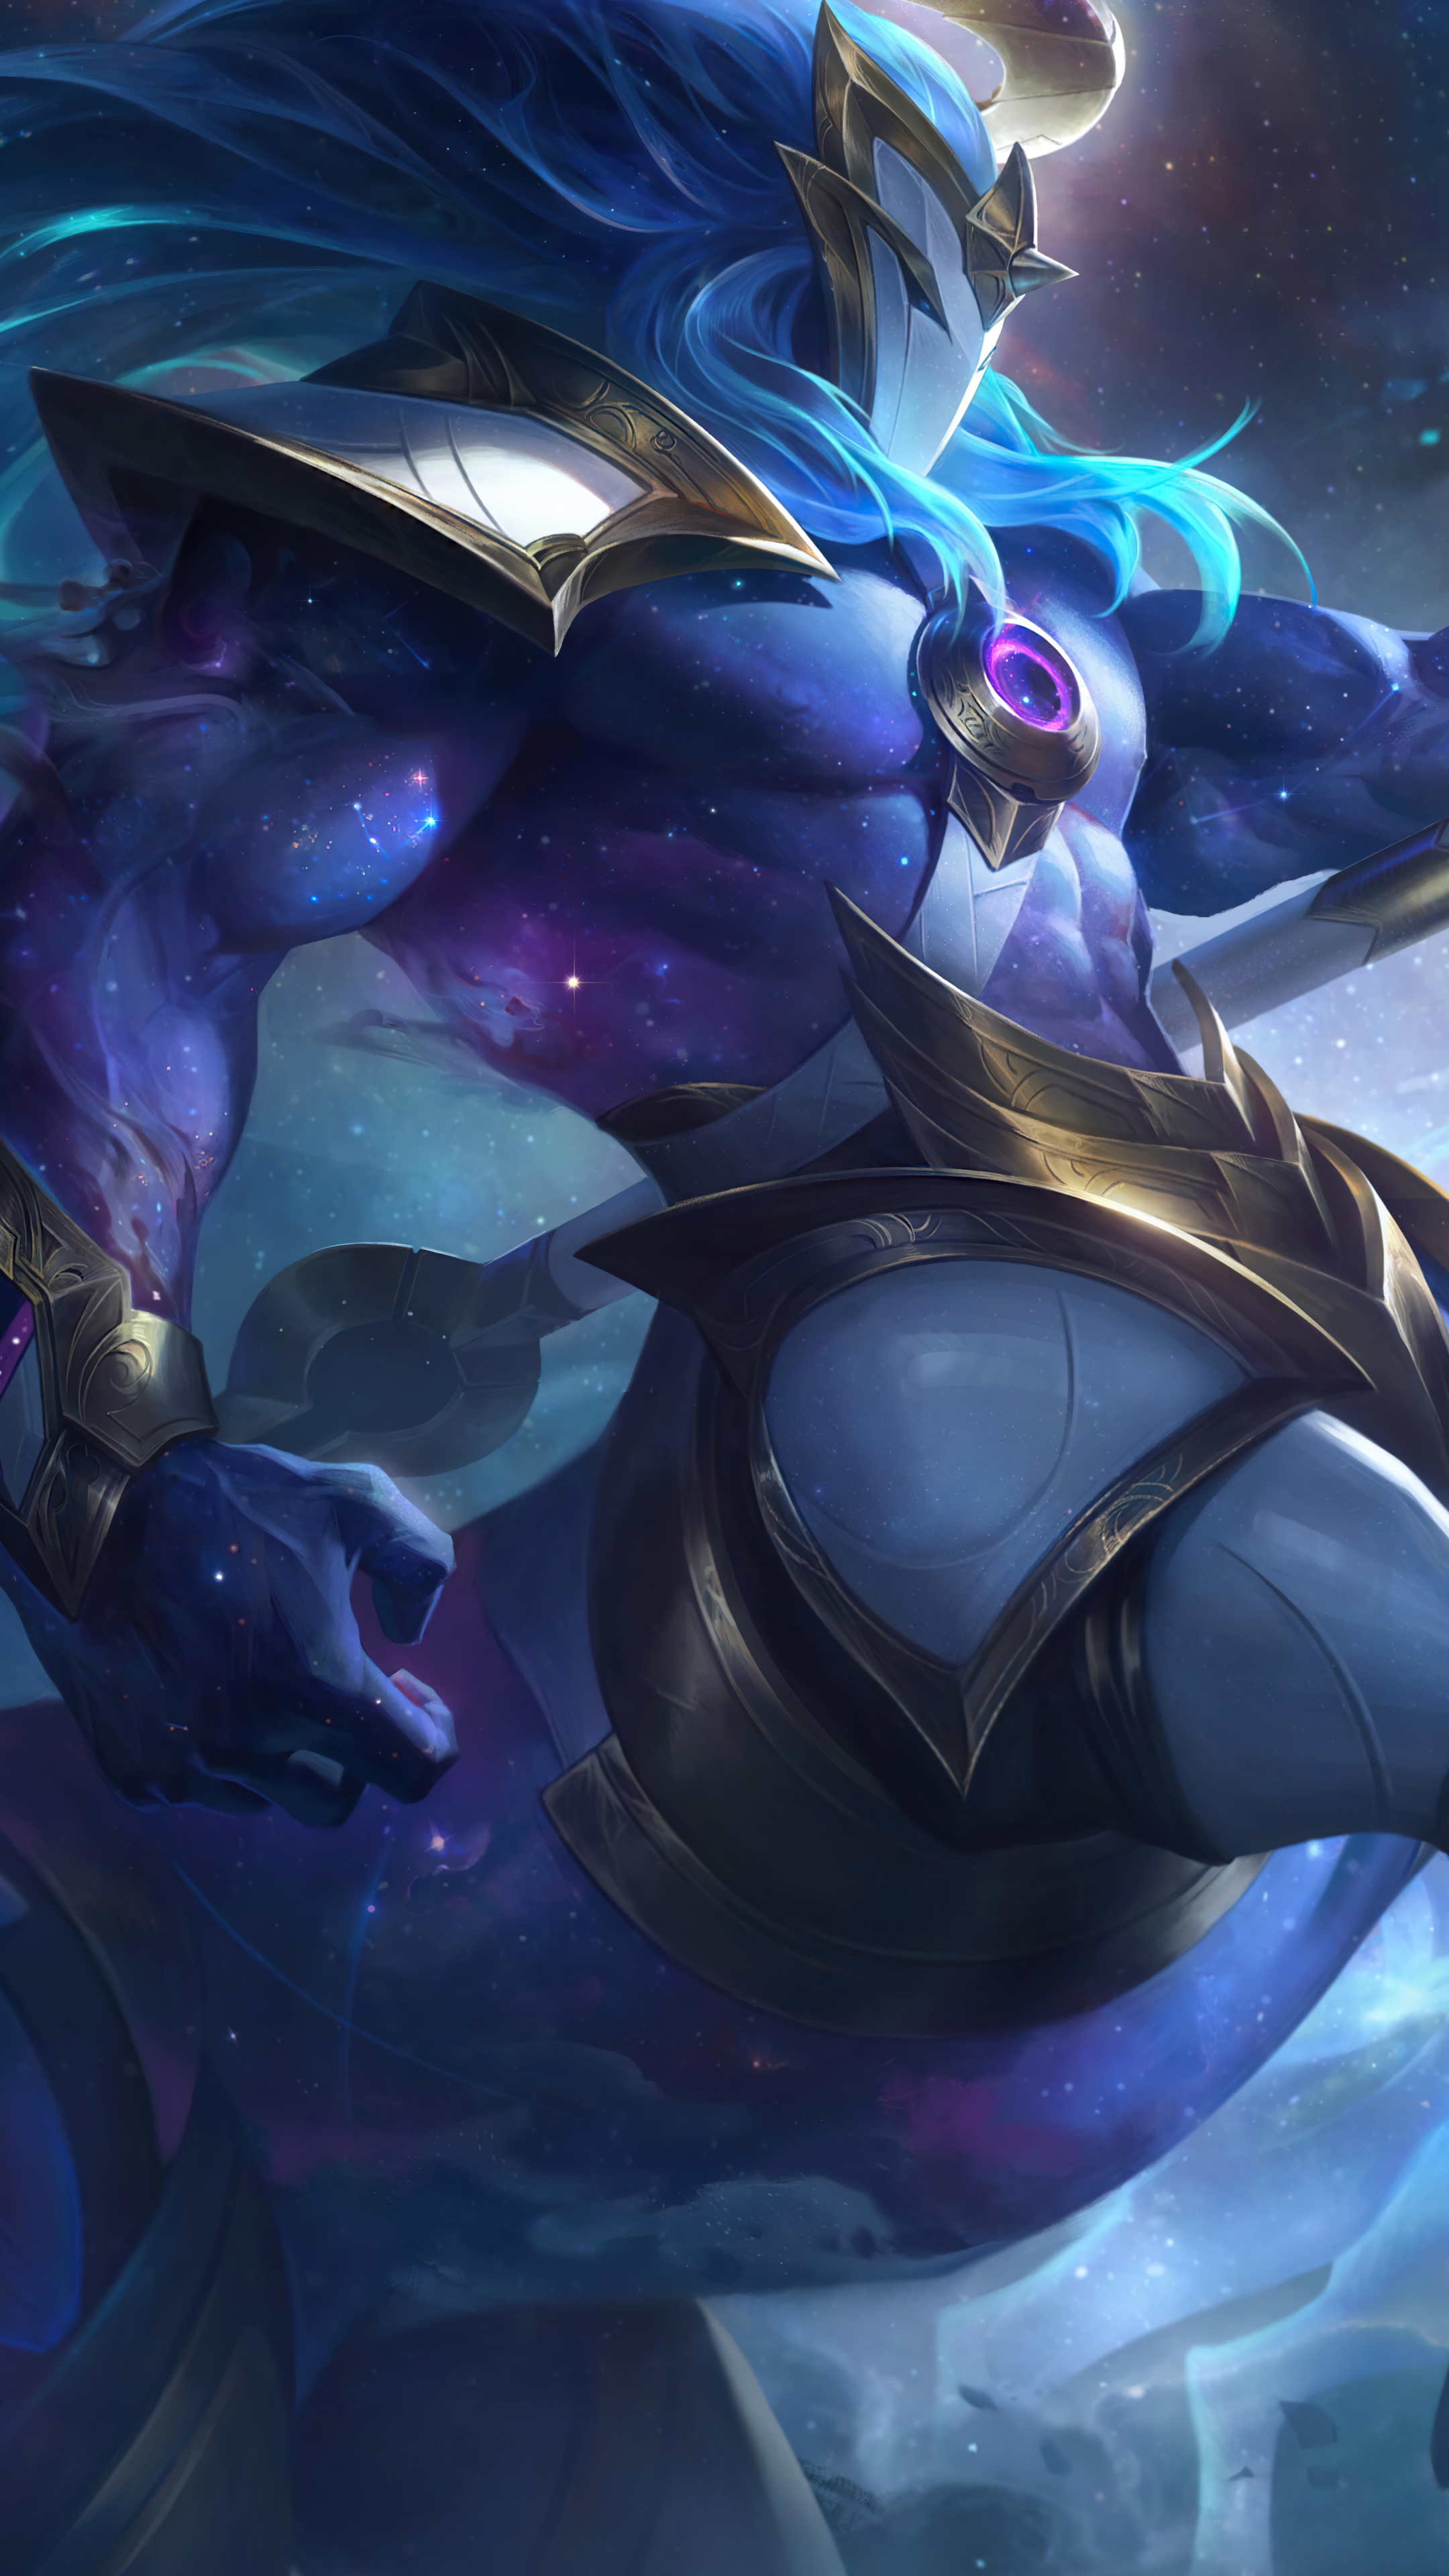 Cosmic Charger Hecarim